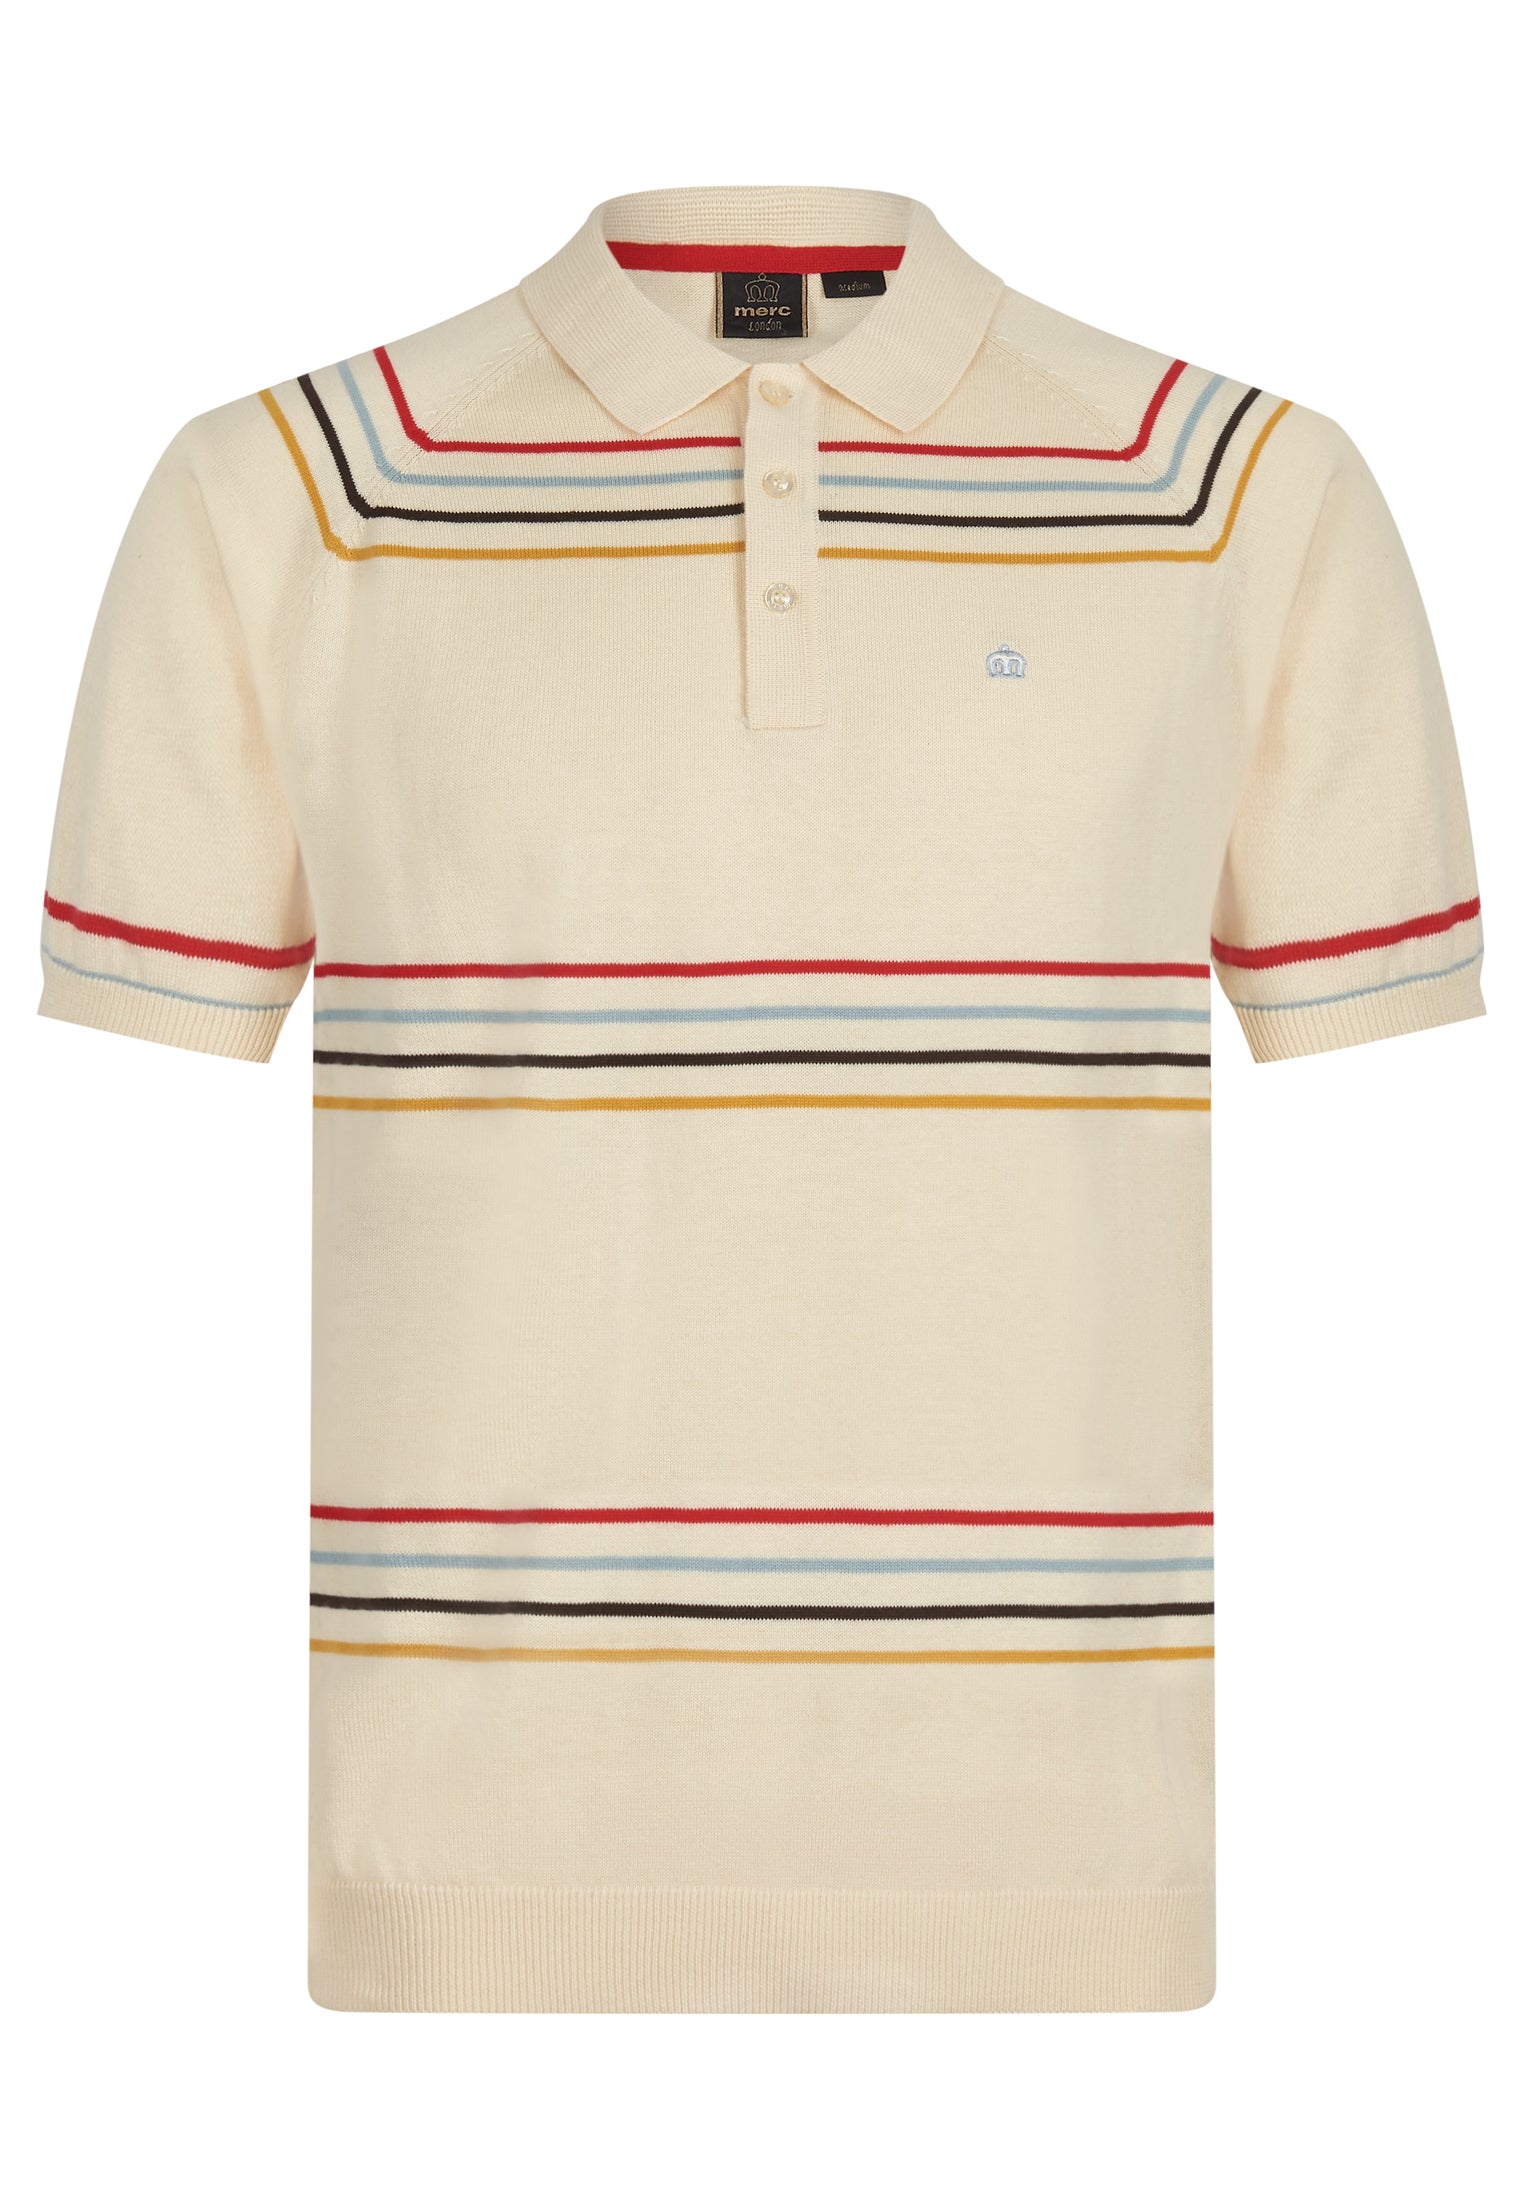 Madison Stripes Knitted Polo Shirt Ghost - Merc London